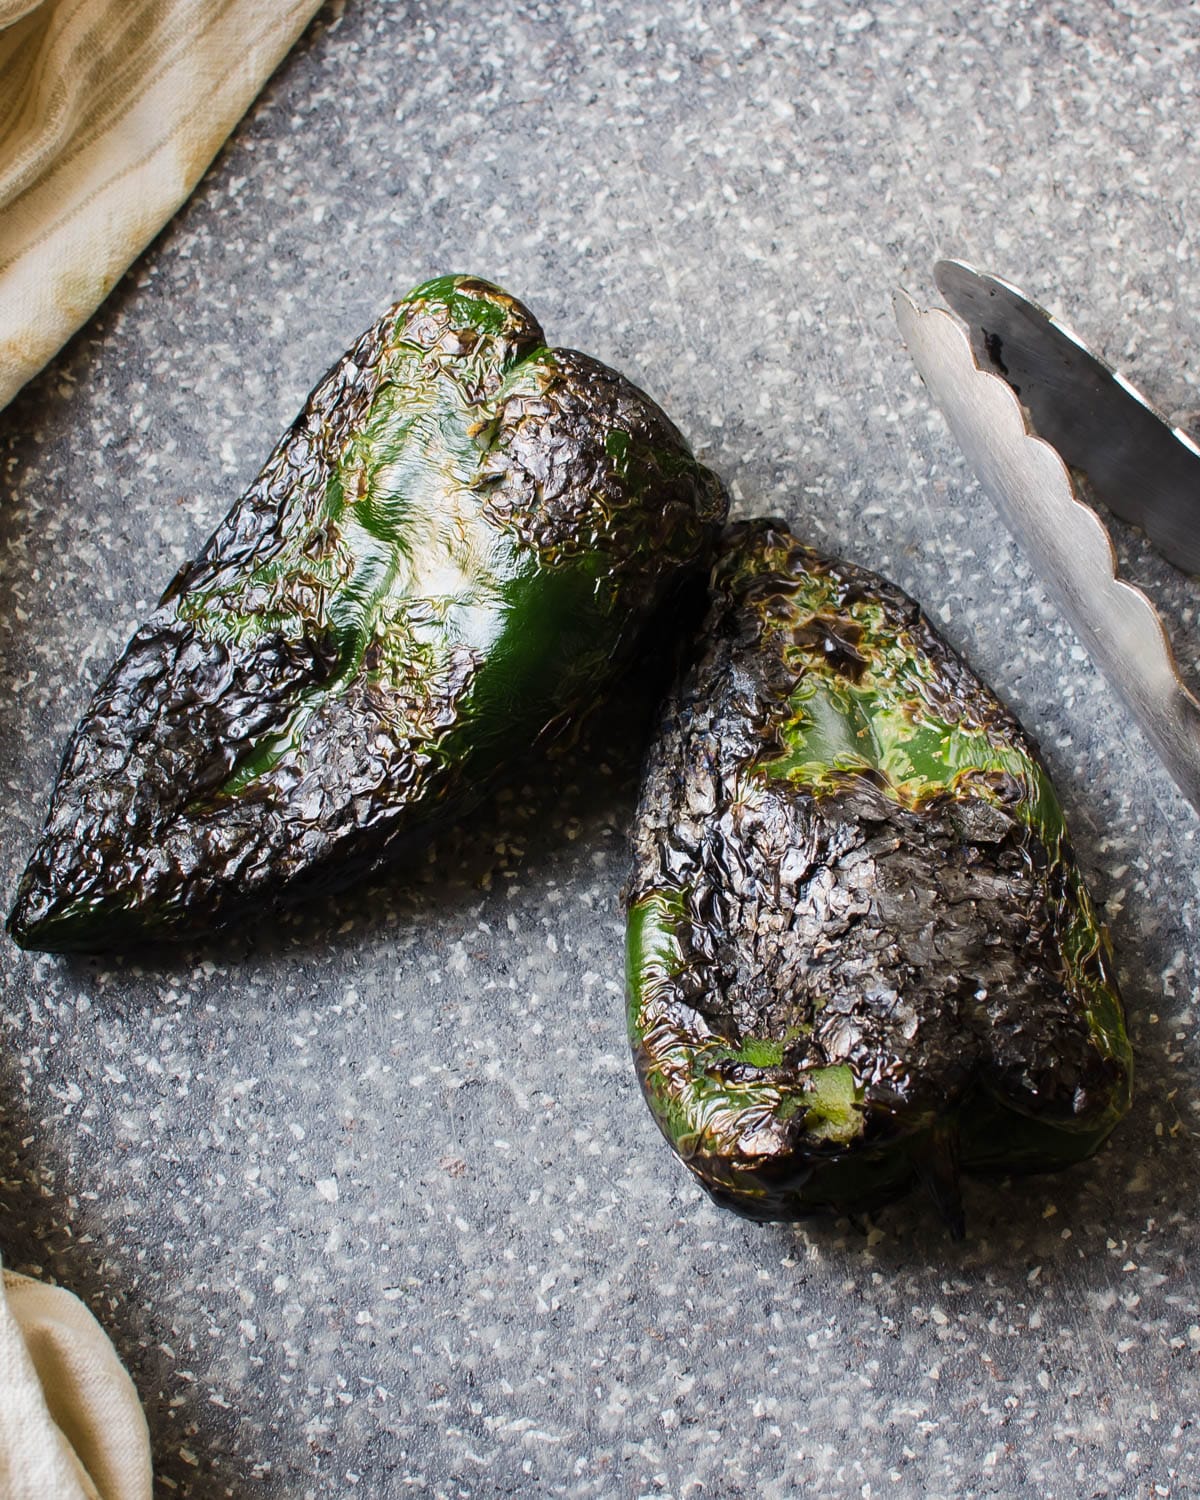 Charred poblano peppers on a cutting board.